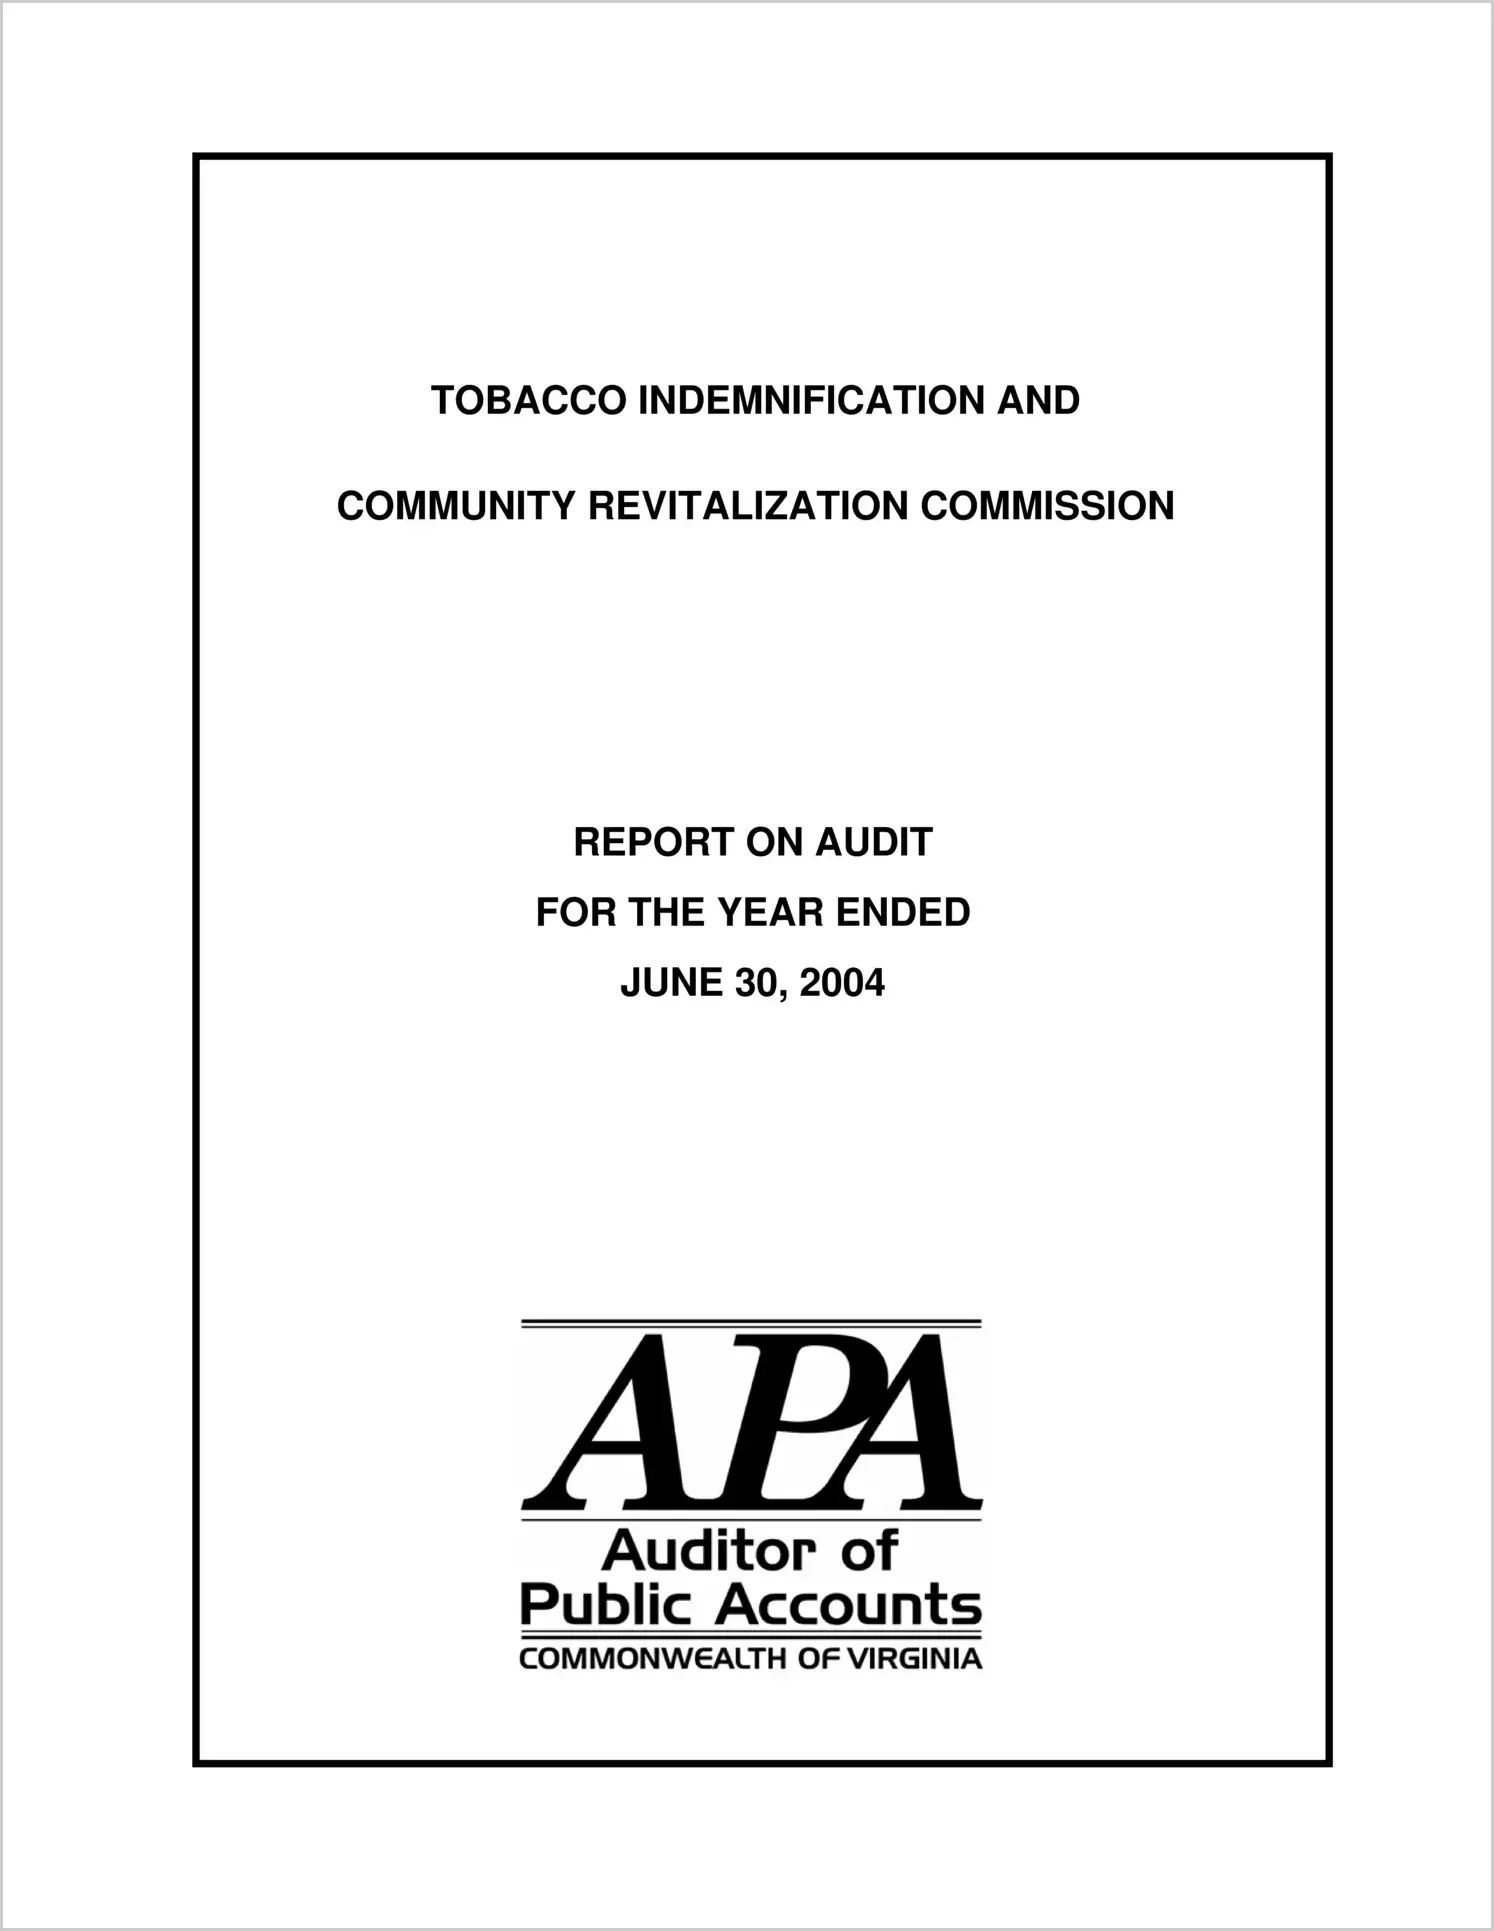 Tobacco Indemnification and Community Revitalization Commission for the year ended June 30, 2004